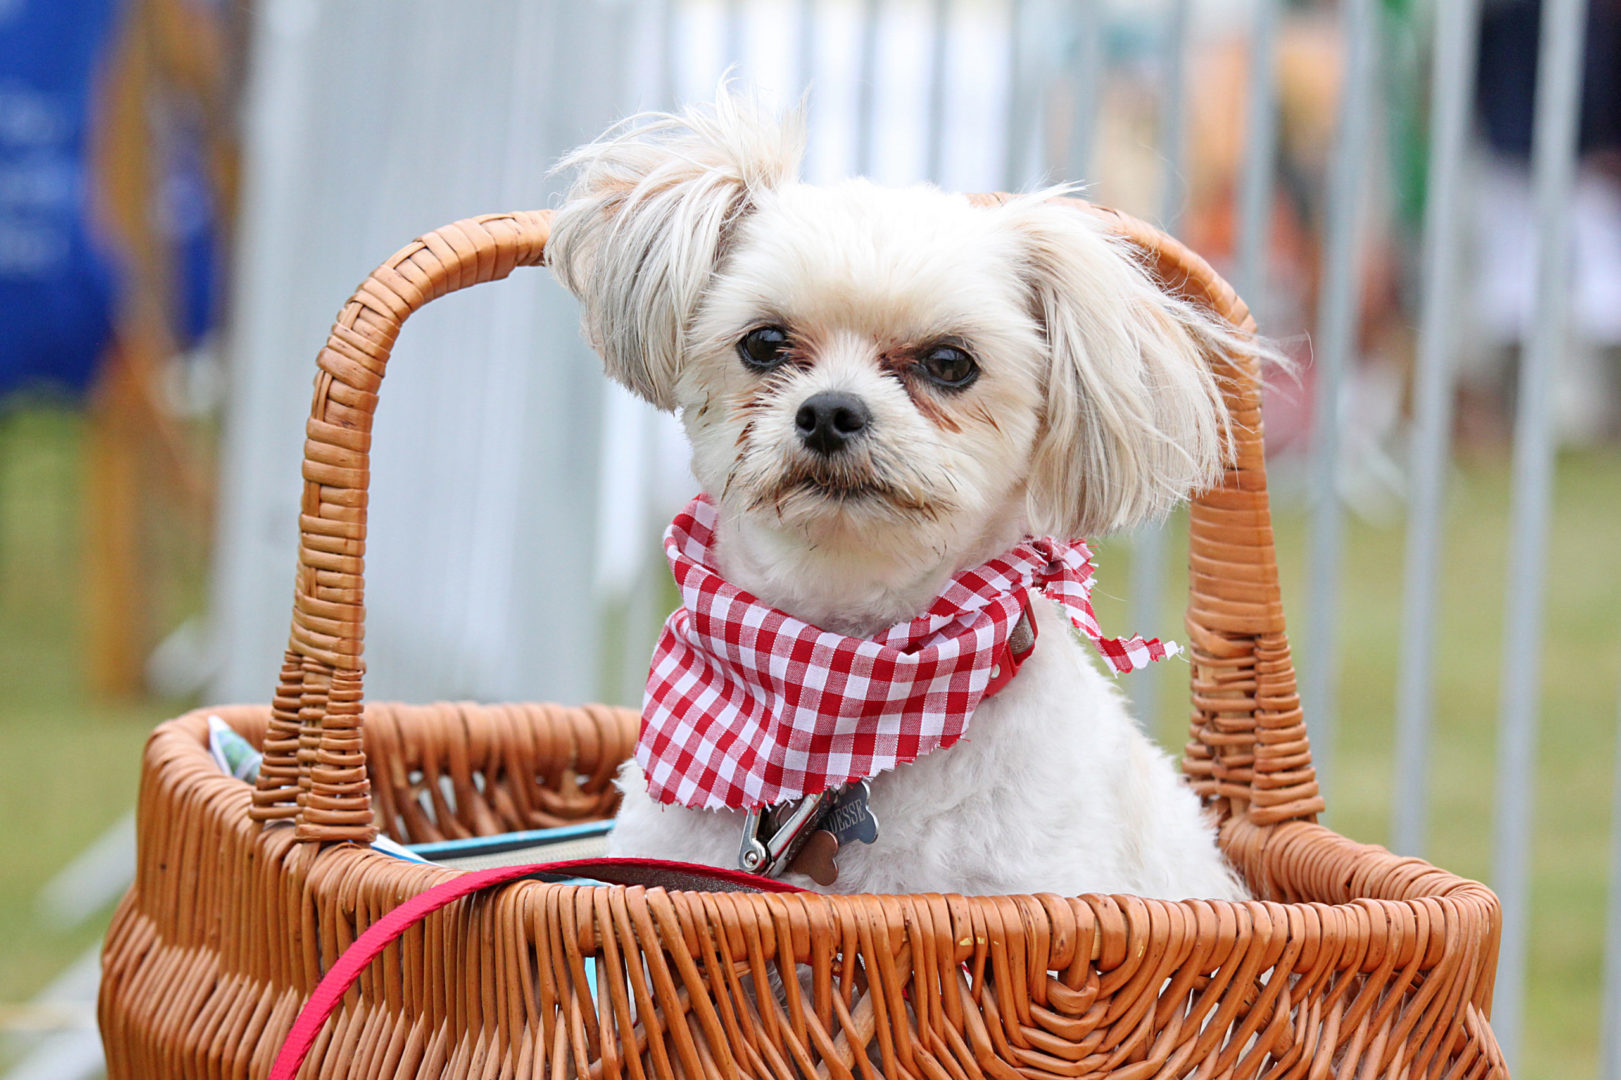 Suffolk Dog Day press photo of small dog in a wicker basket wearing a red & white check neckerchief